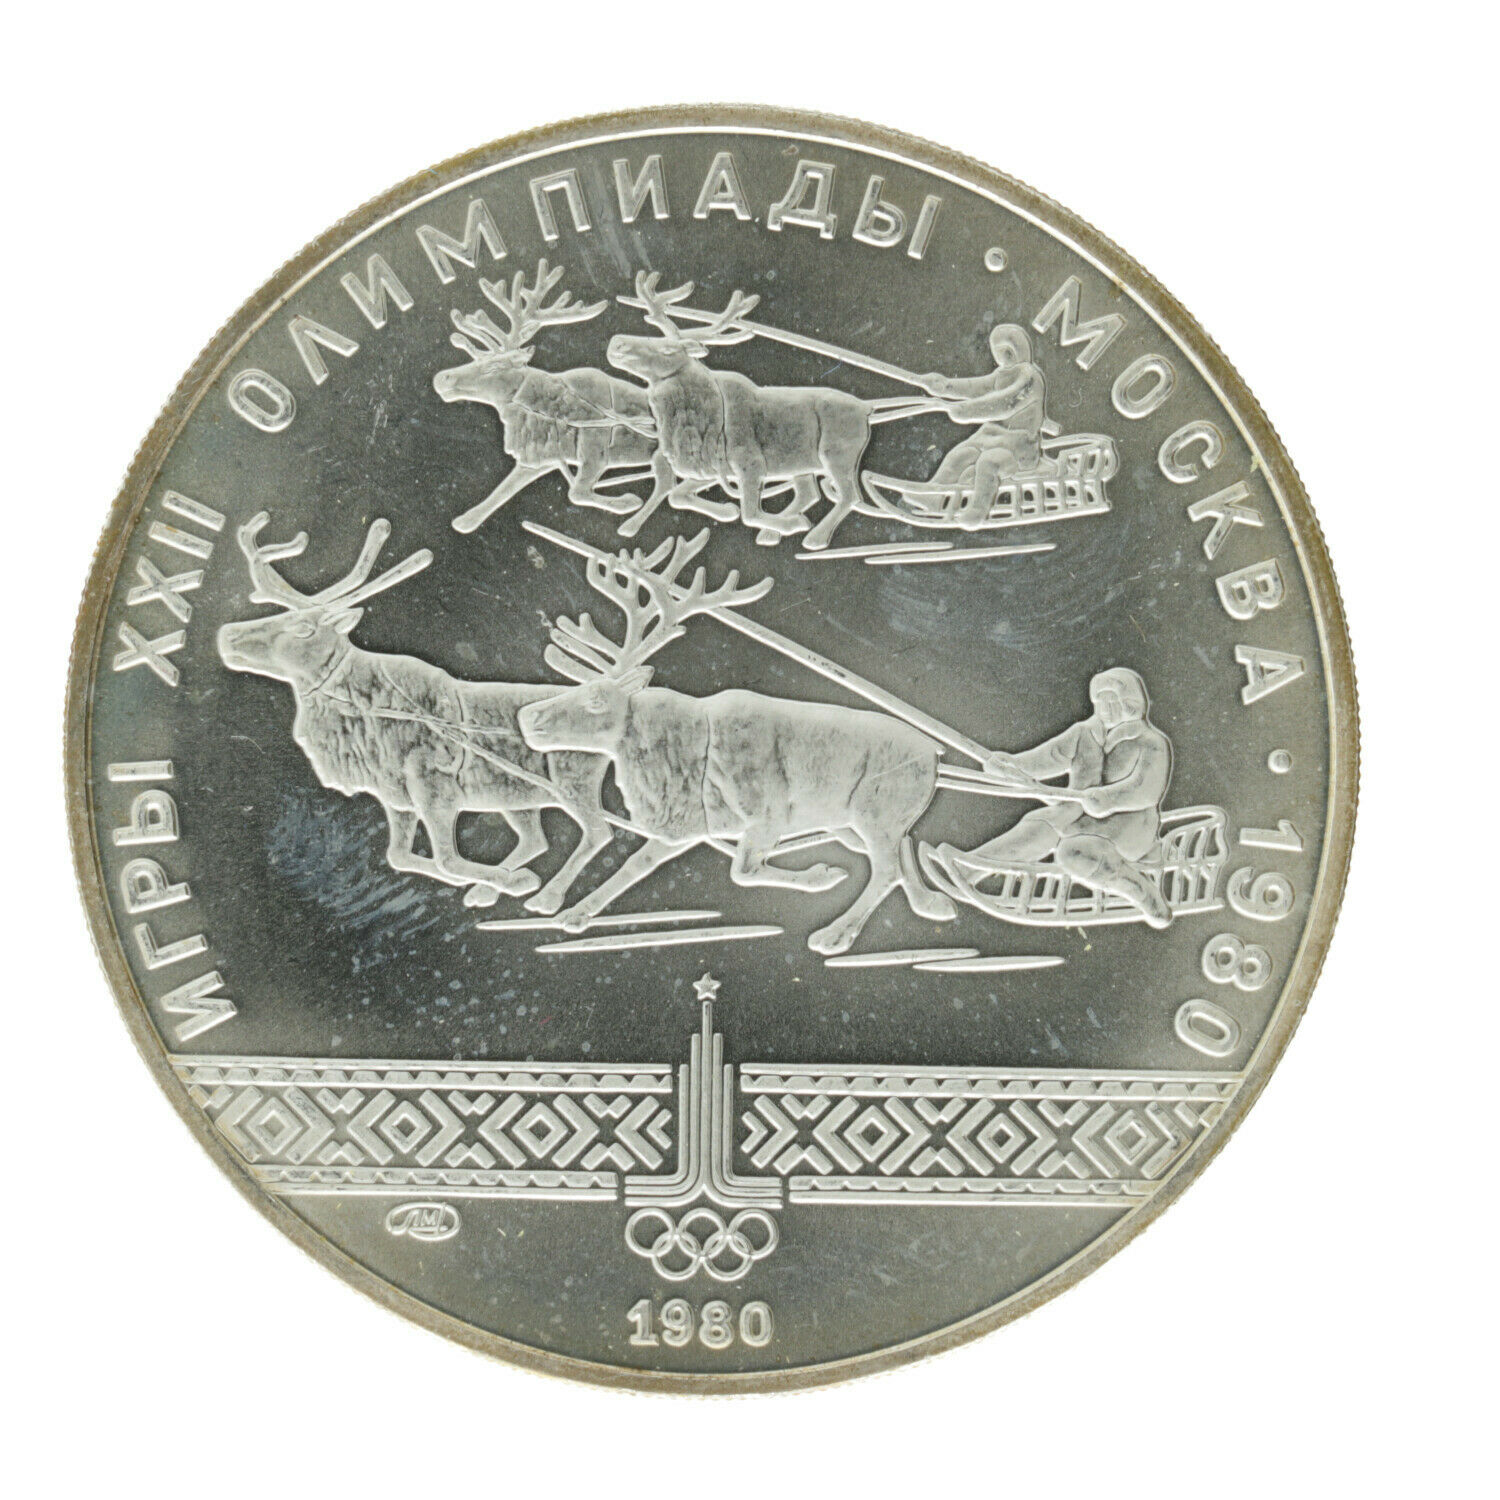 Russia - Silver 10 Rouble Coin - 'reindeer Racing' - 1980 - Unc